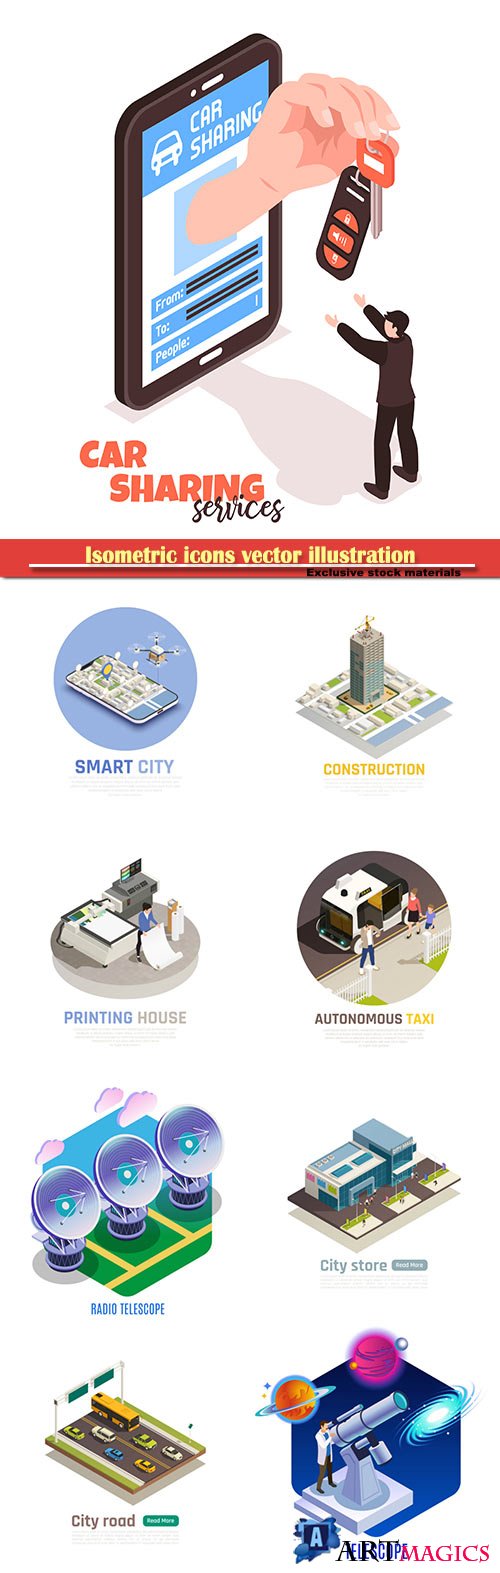 Isometric icons vector illustration, banner design template # 34